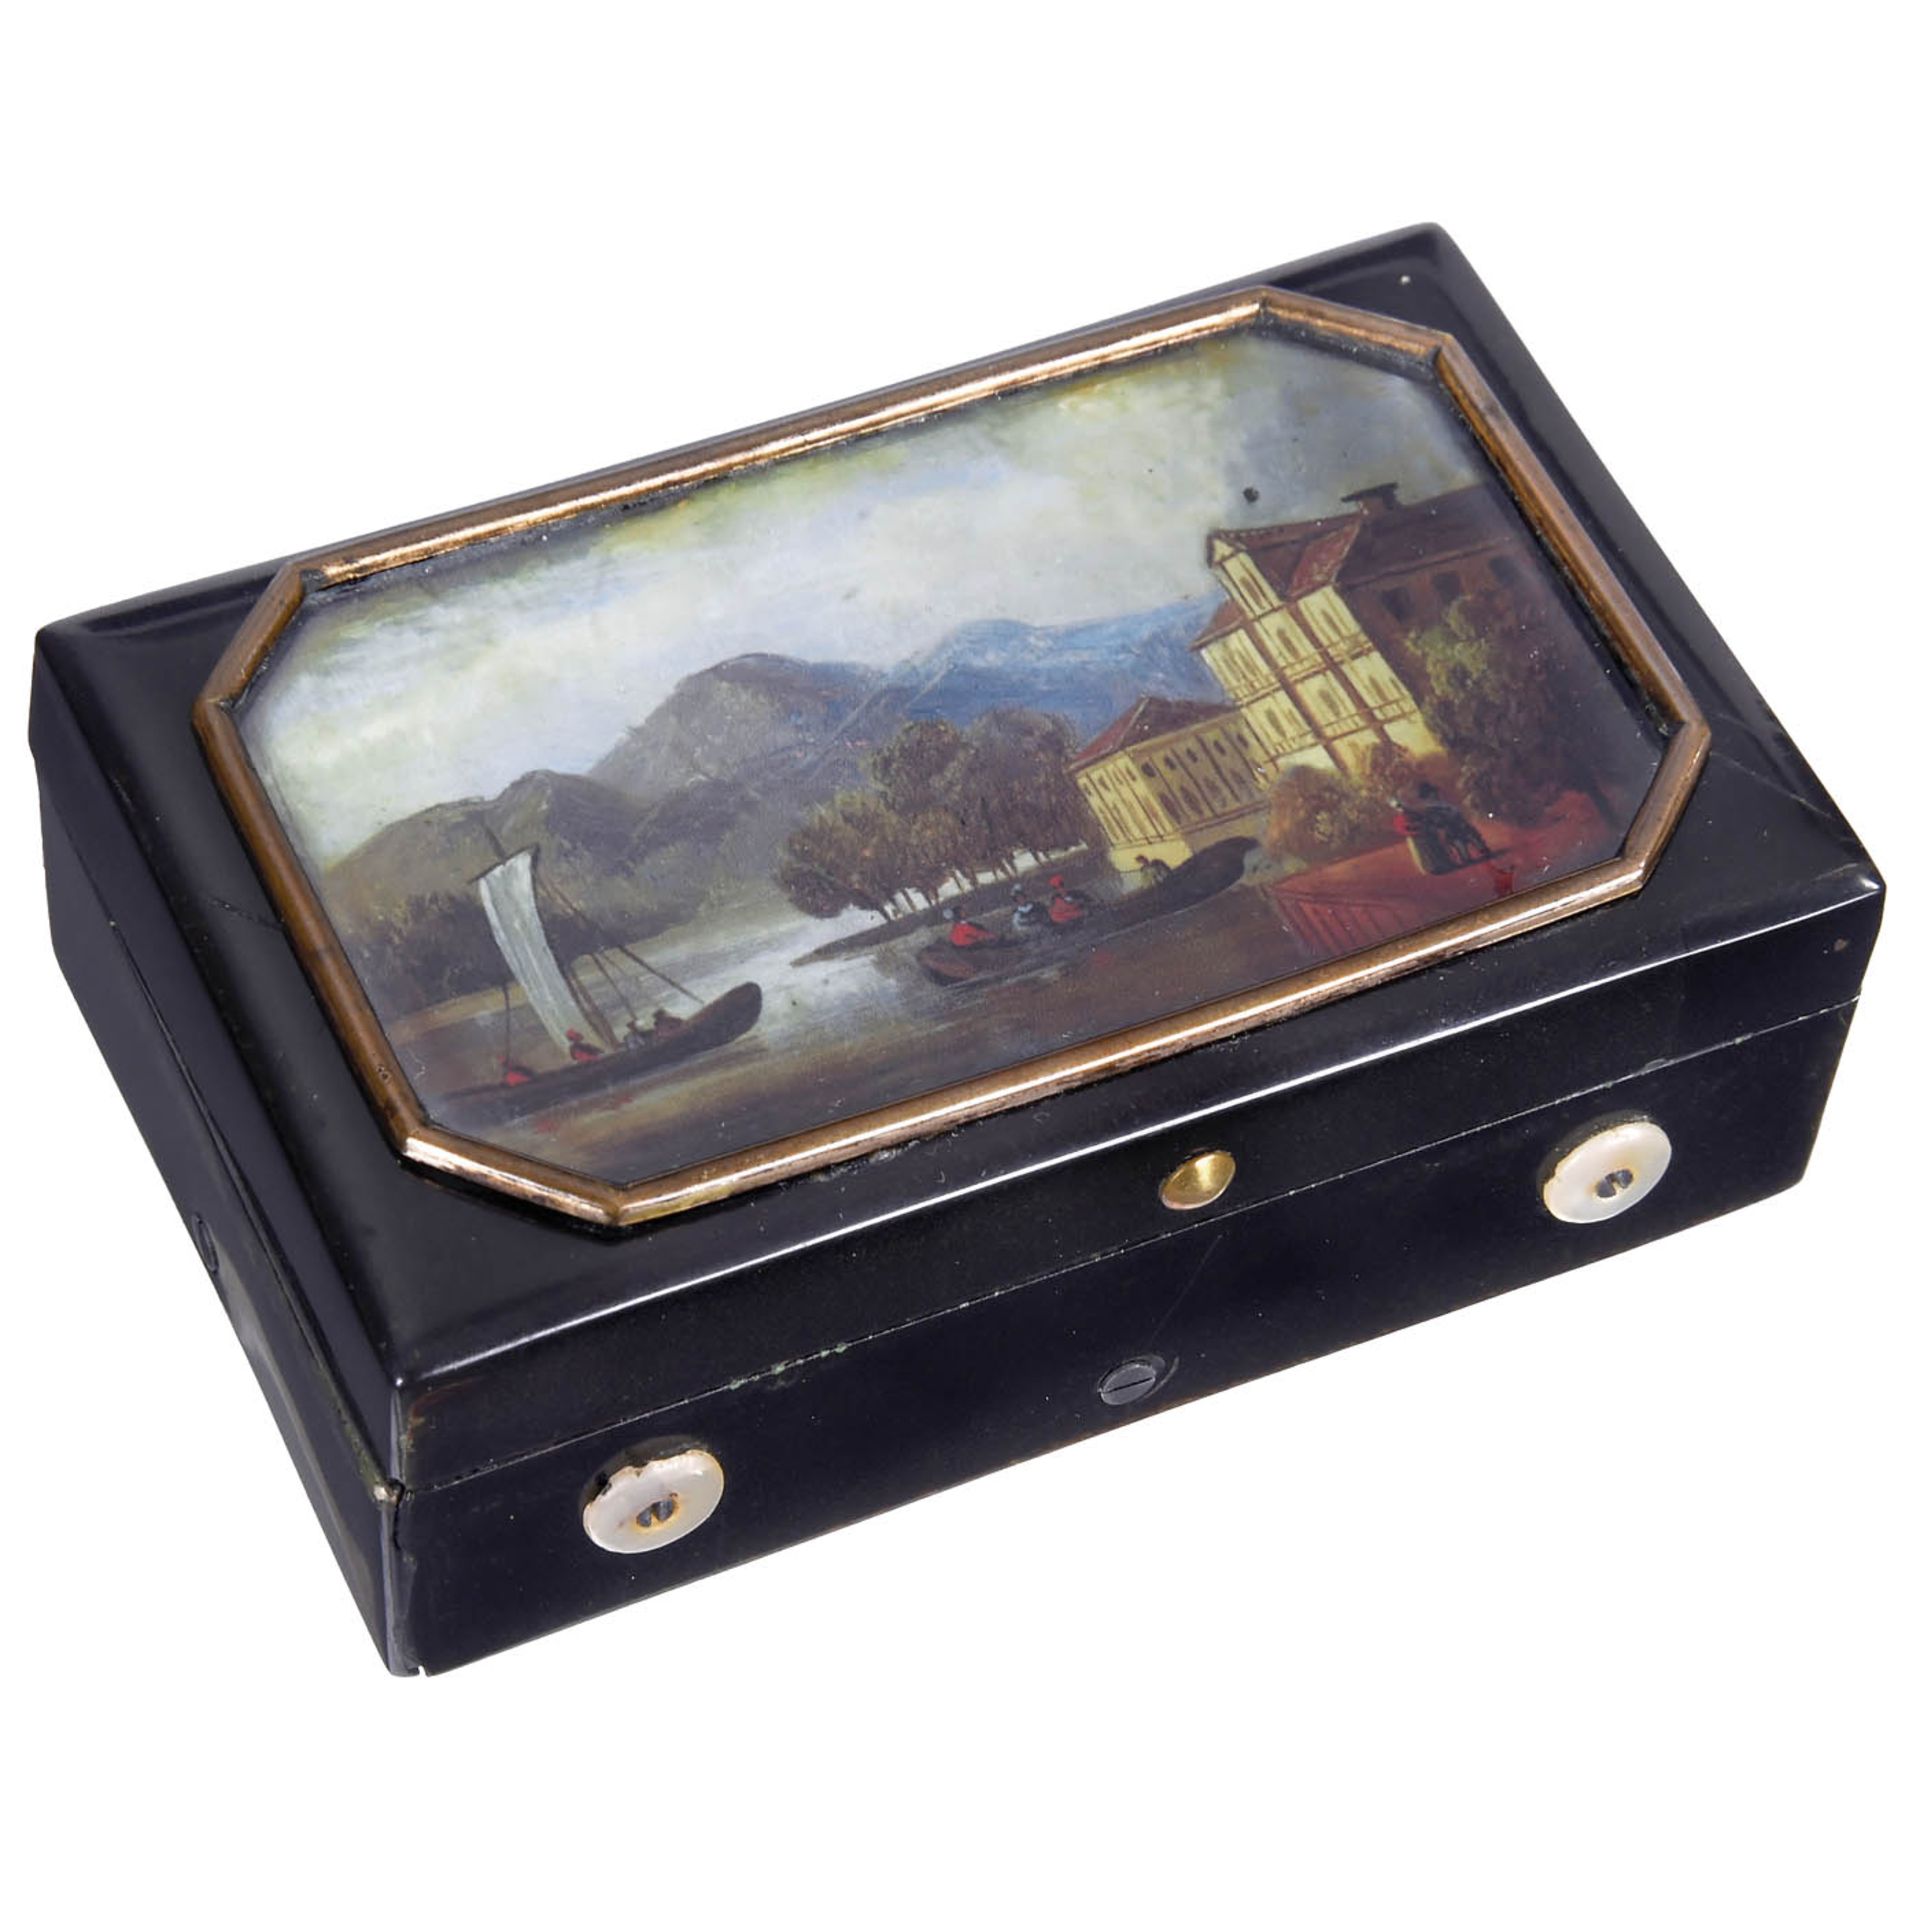 Part-Overture Musical Snuff Box, c. 1850 - Image 2 of 4